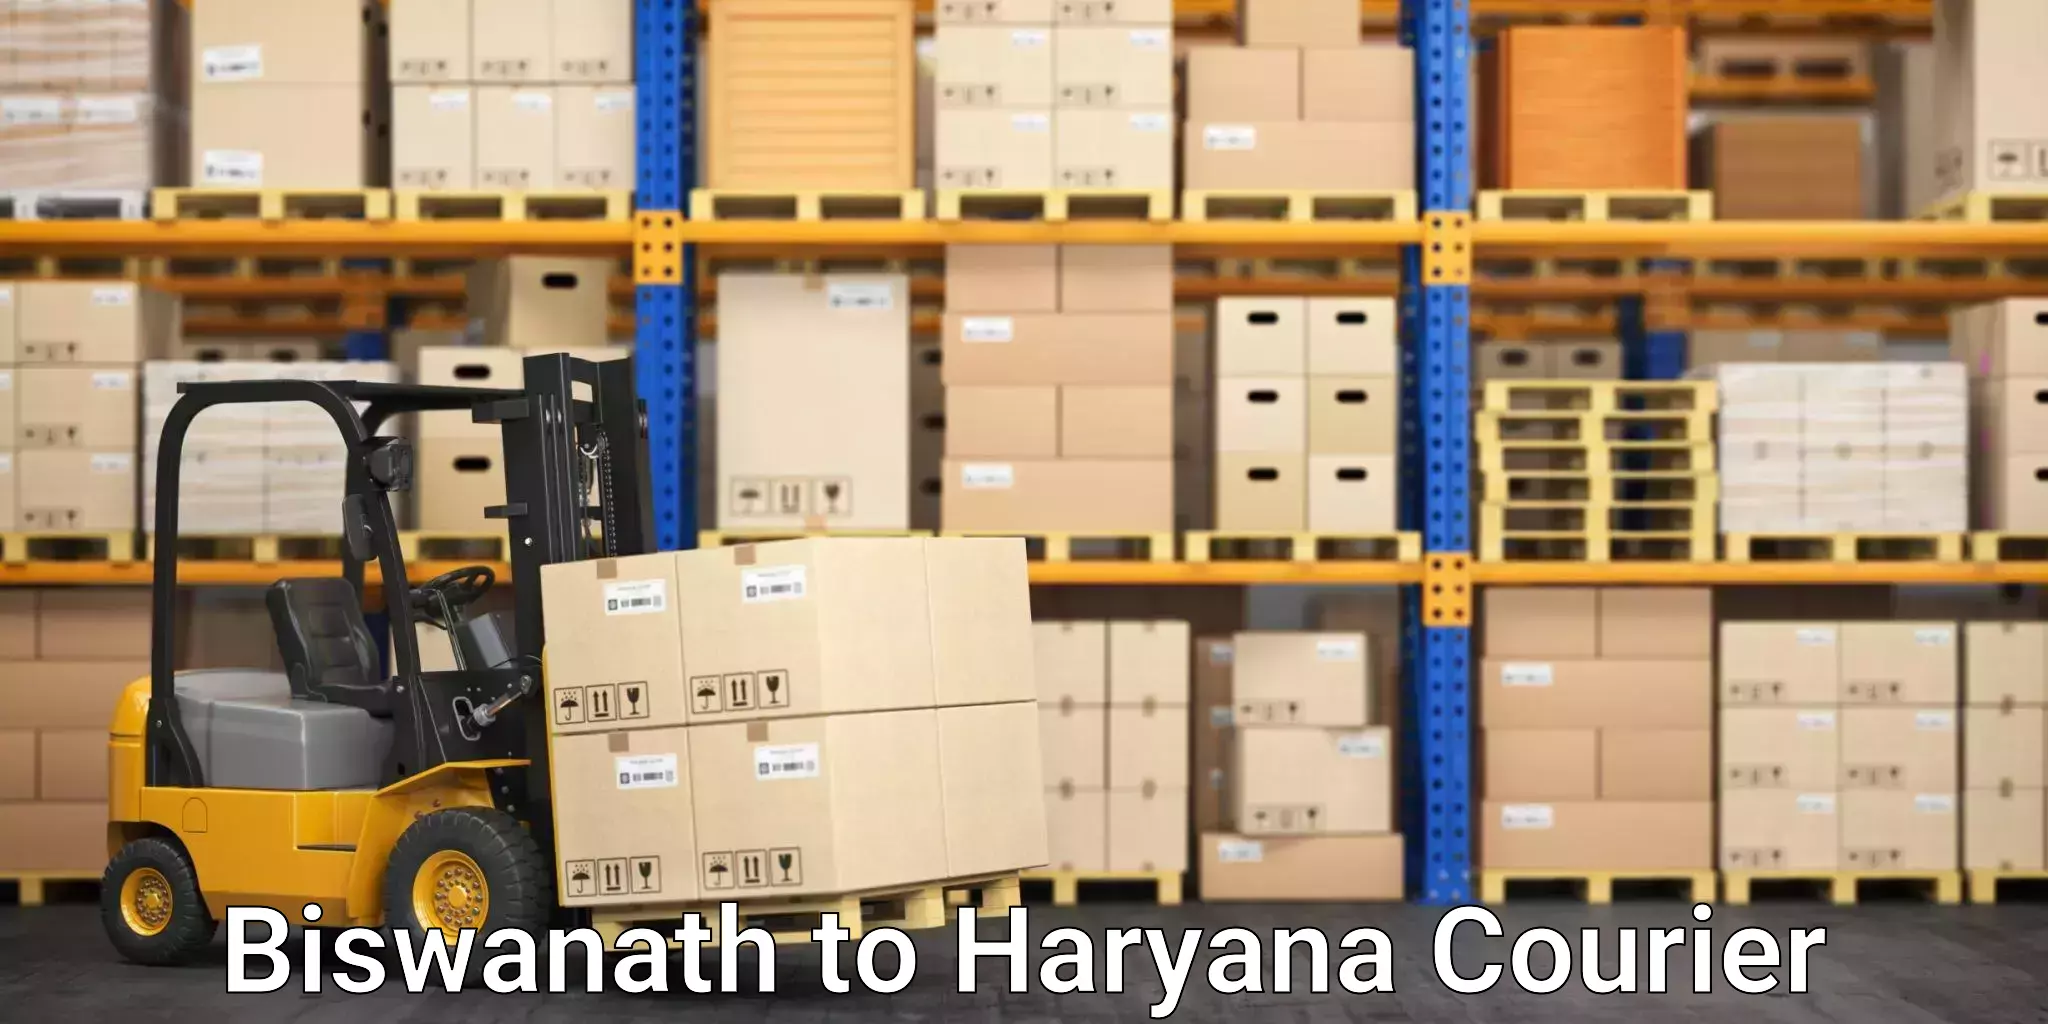 Reliable courier service Biswanath to Bilaspur Haryana